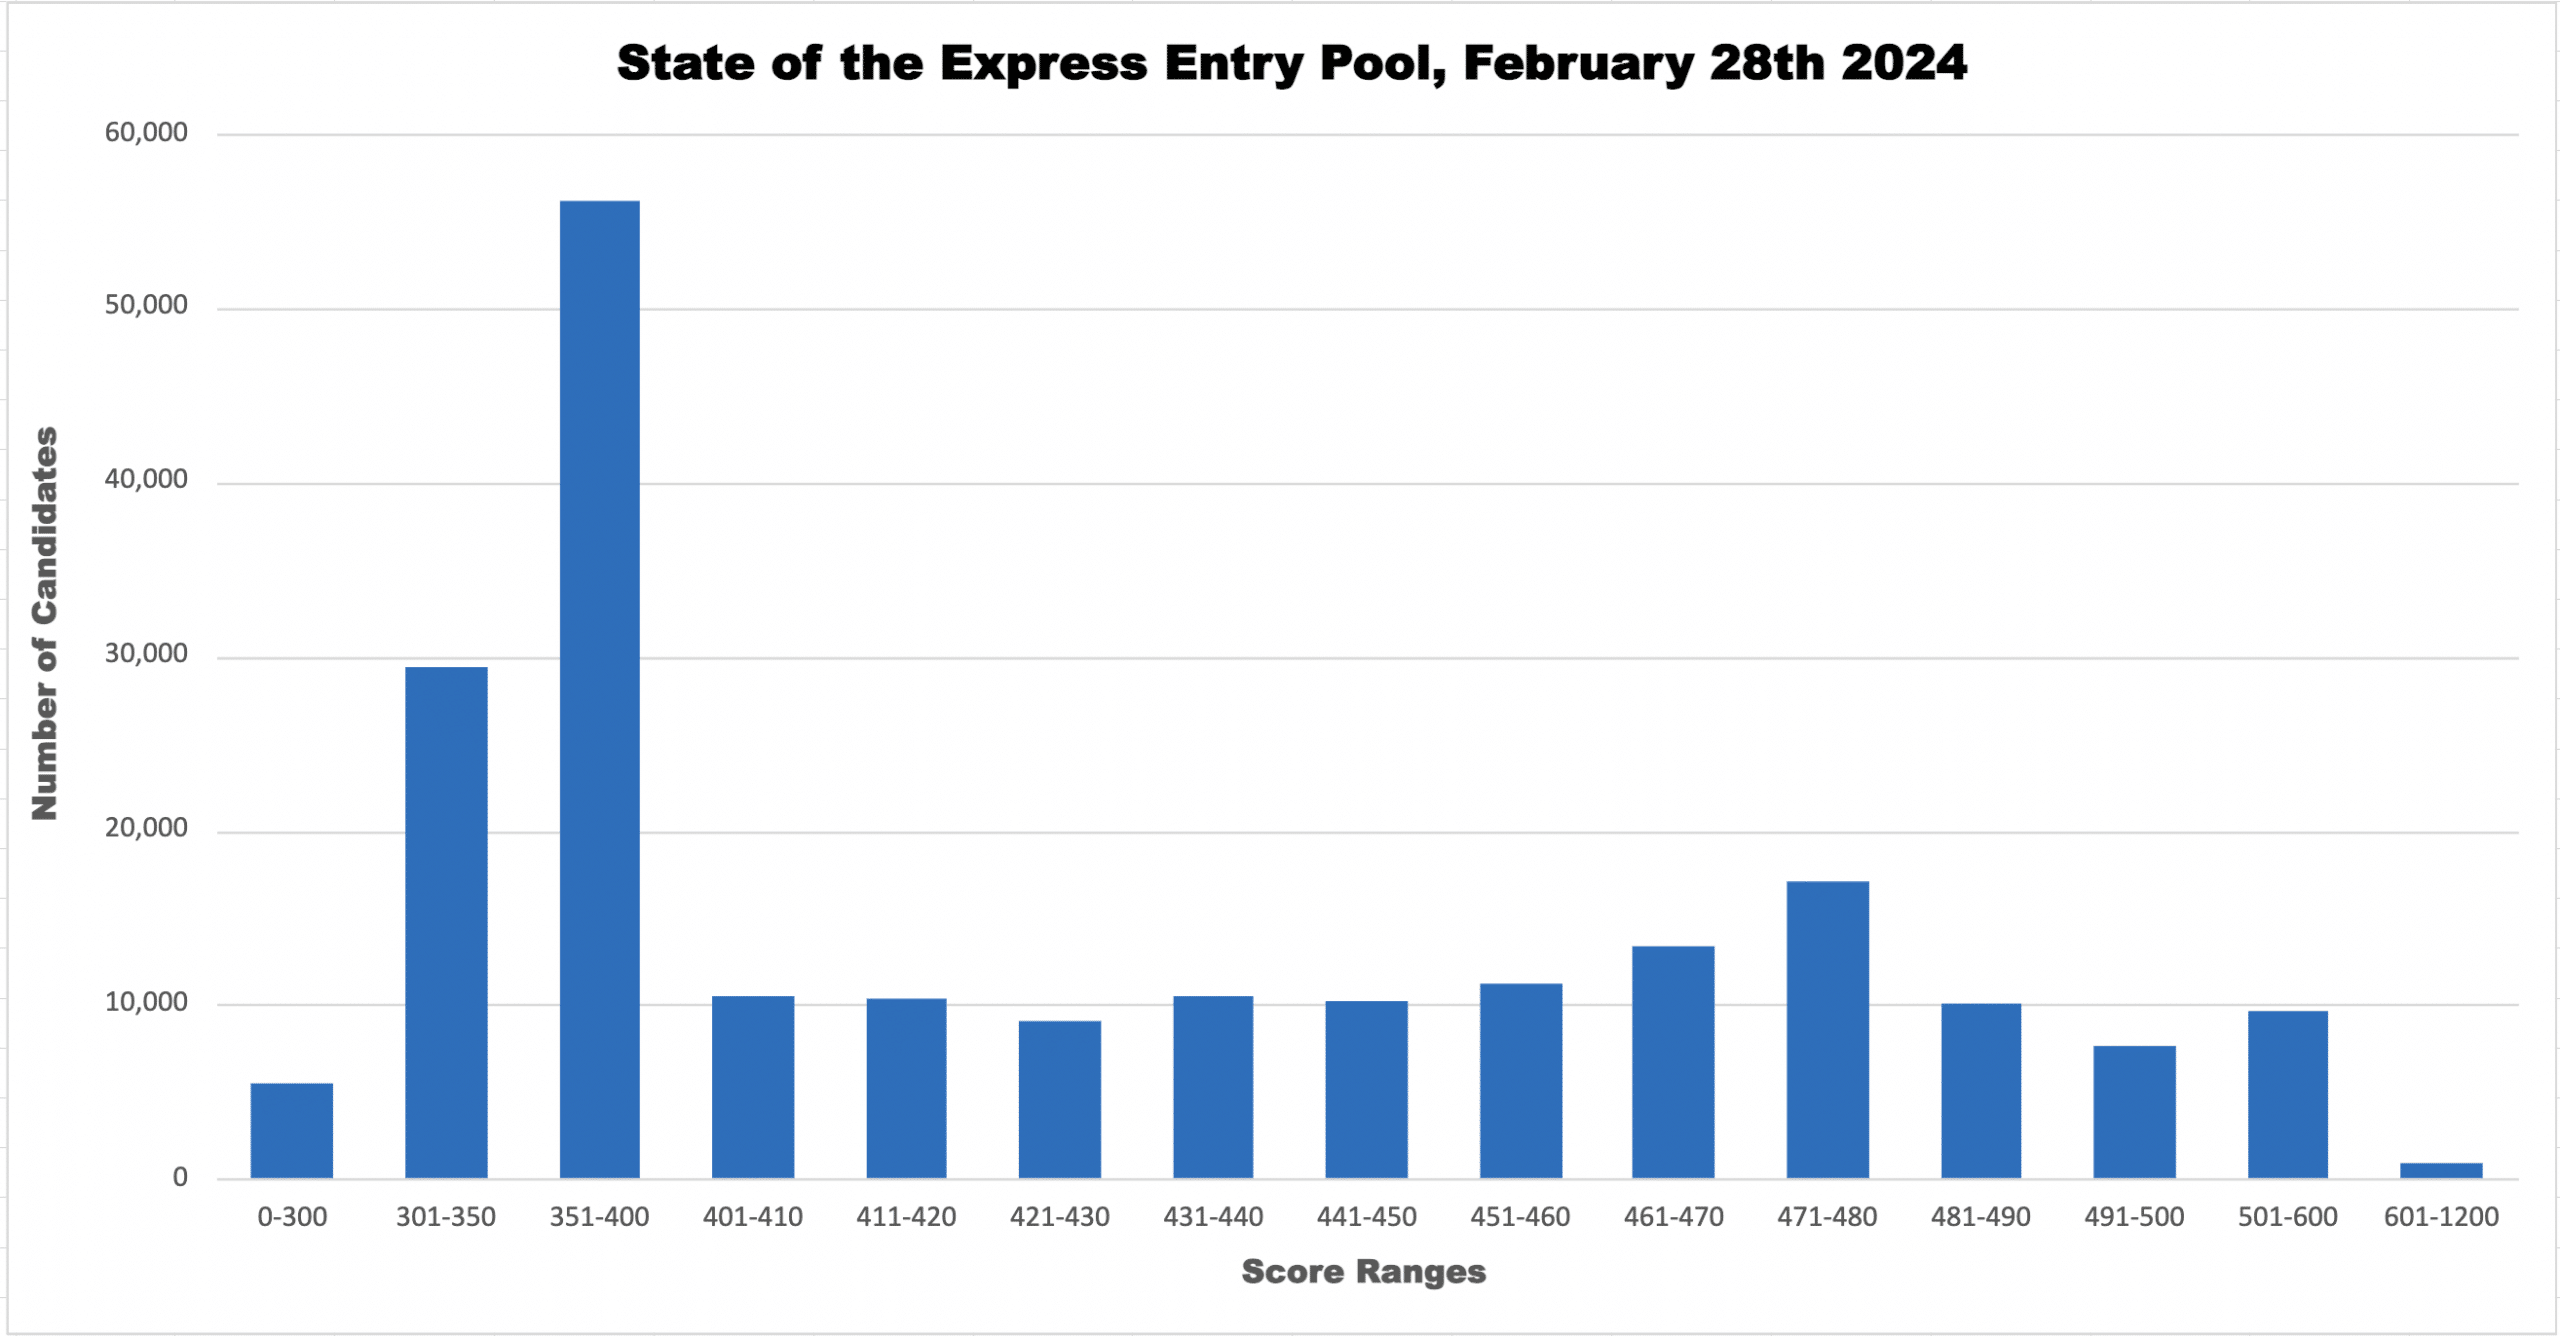 A graph showing the distribution of CRS scores in the Express Entry pool, as of Feb 28th 2024